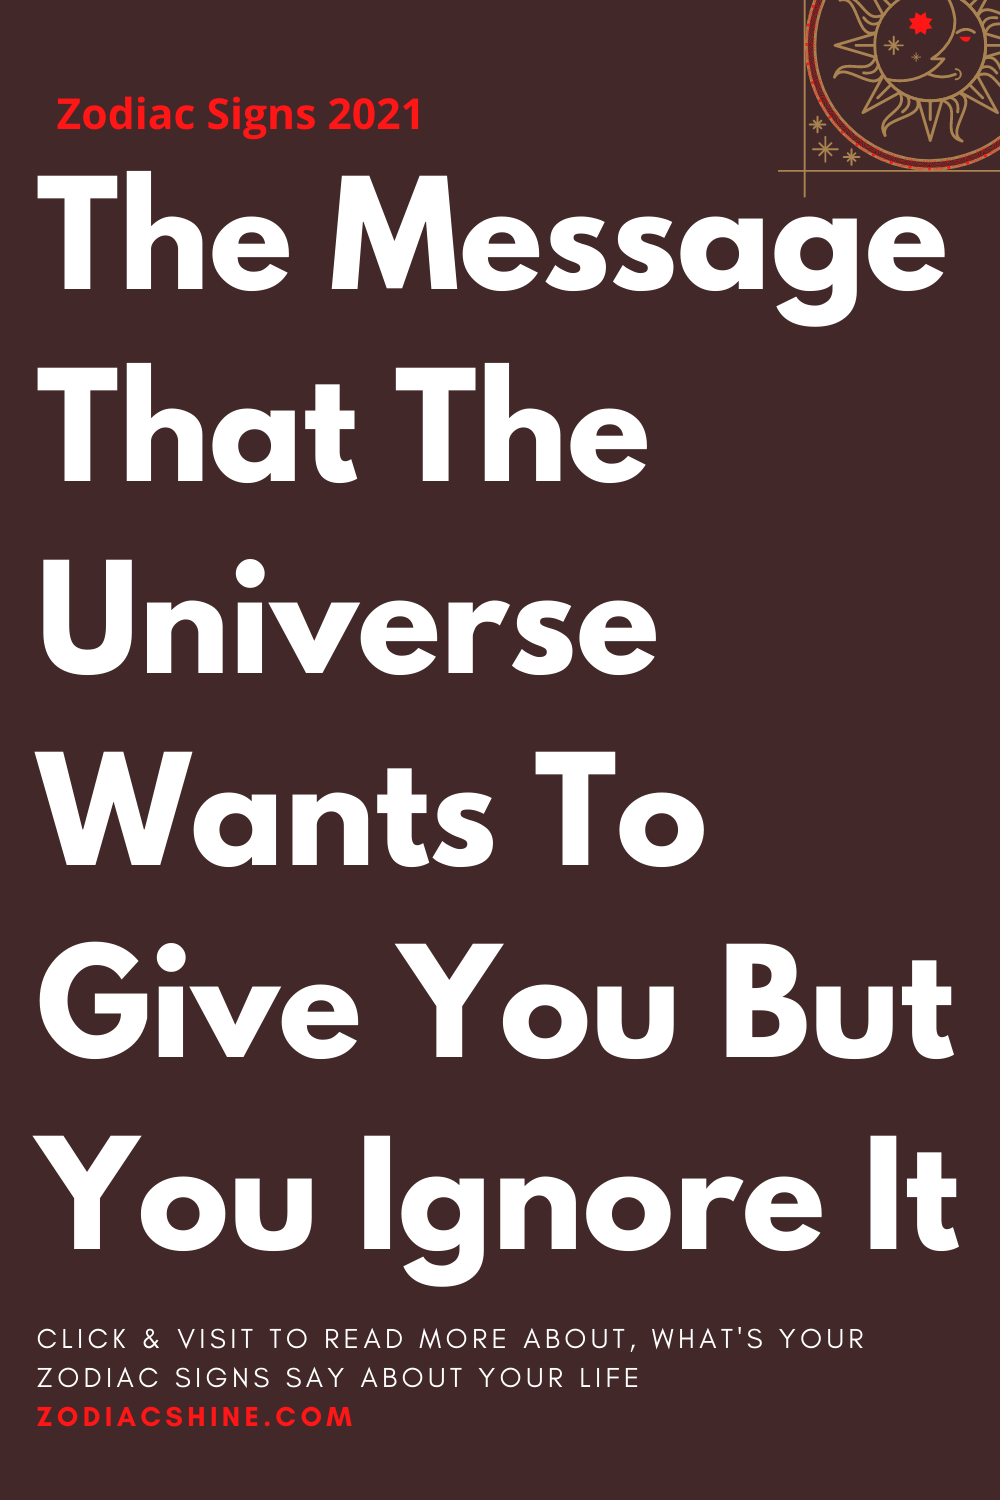 The Message That The Universe Wants To Give You But You Ignore It